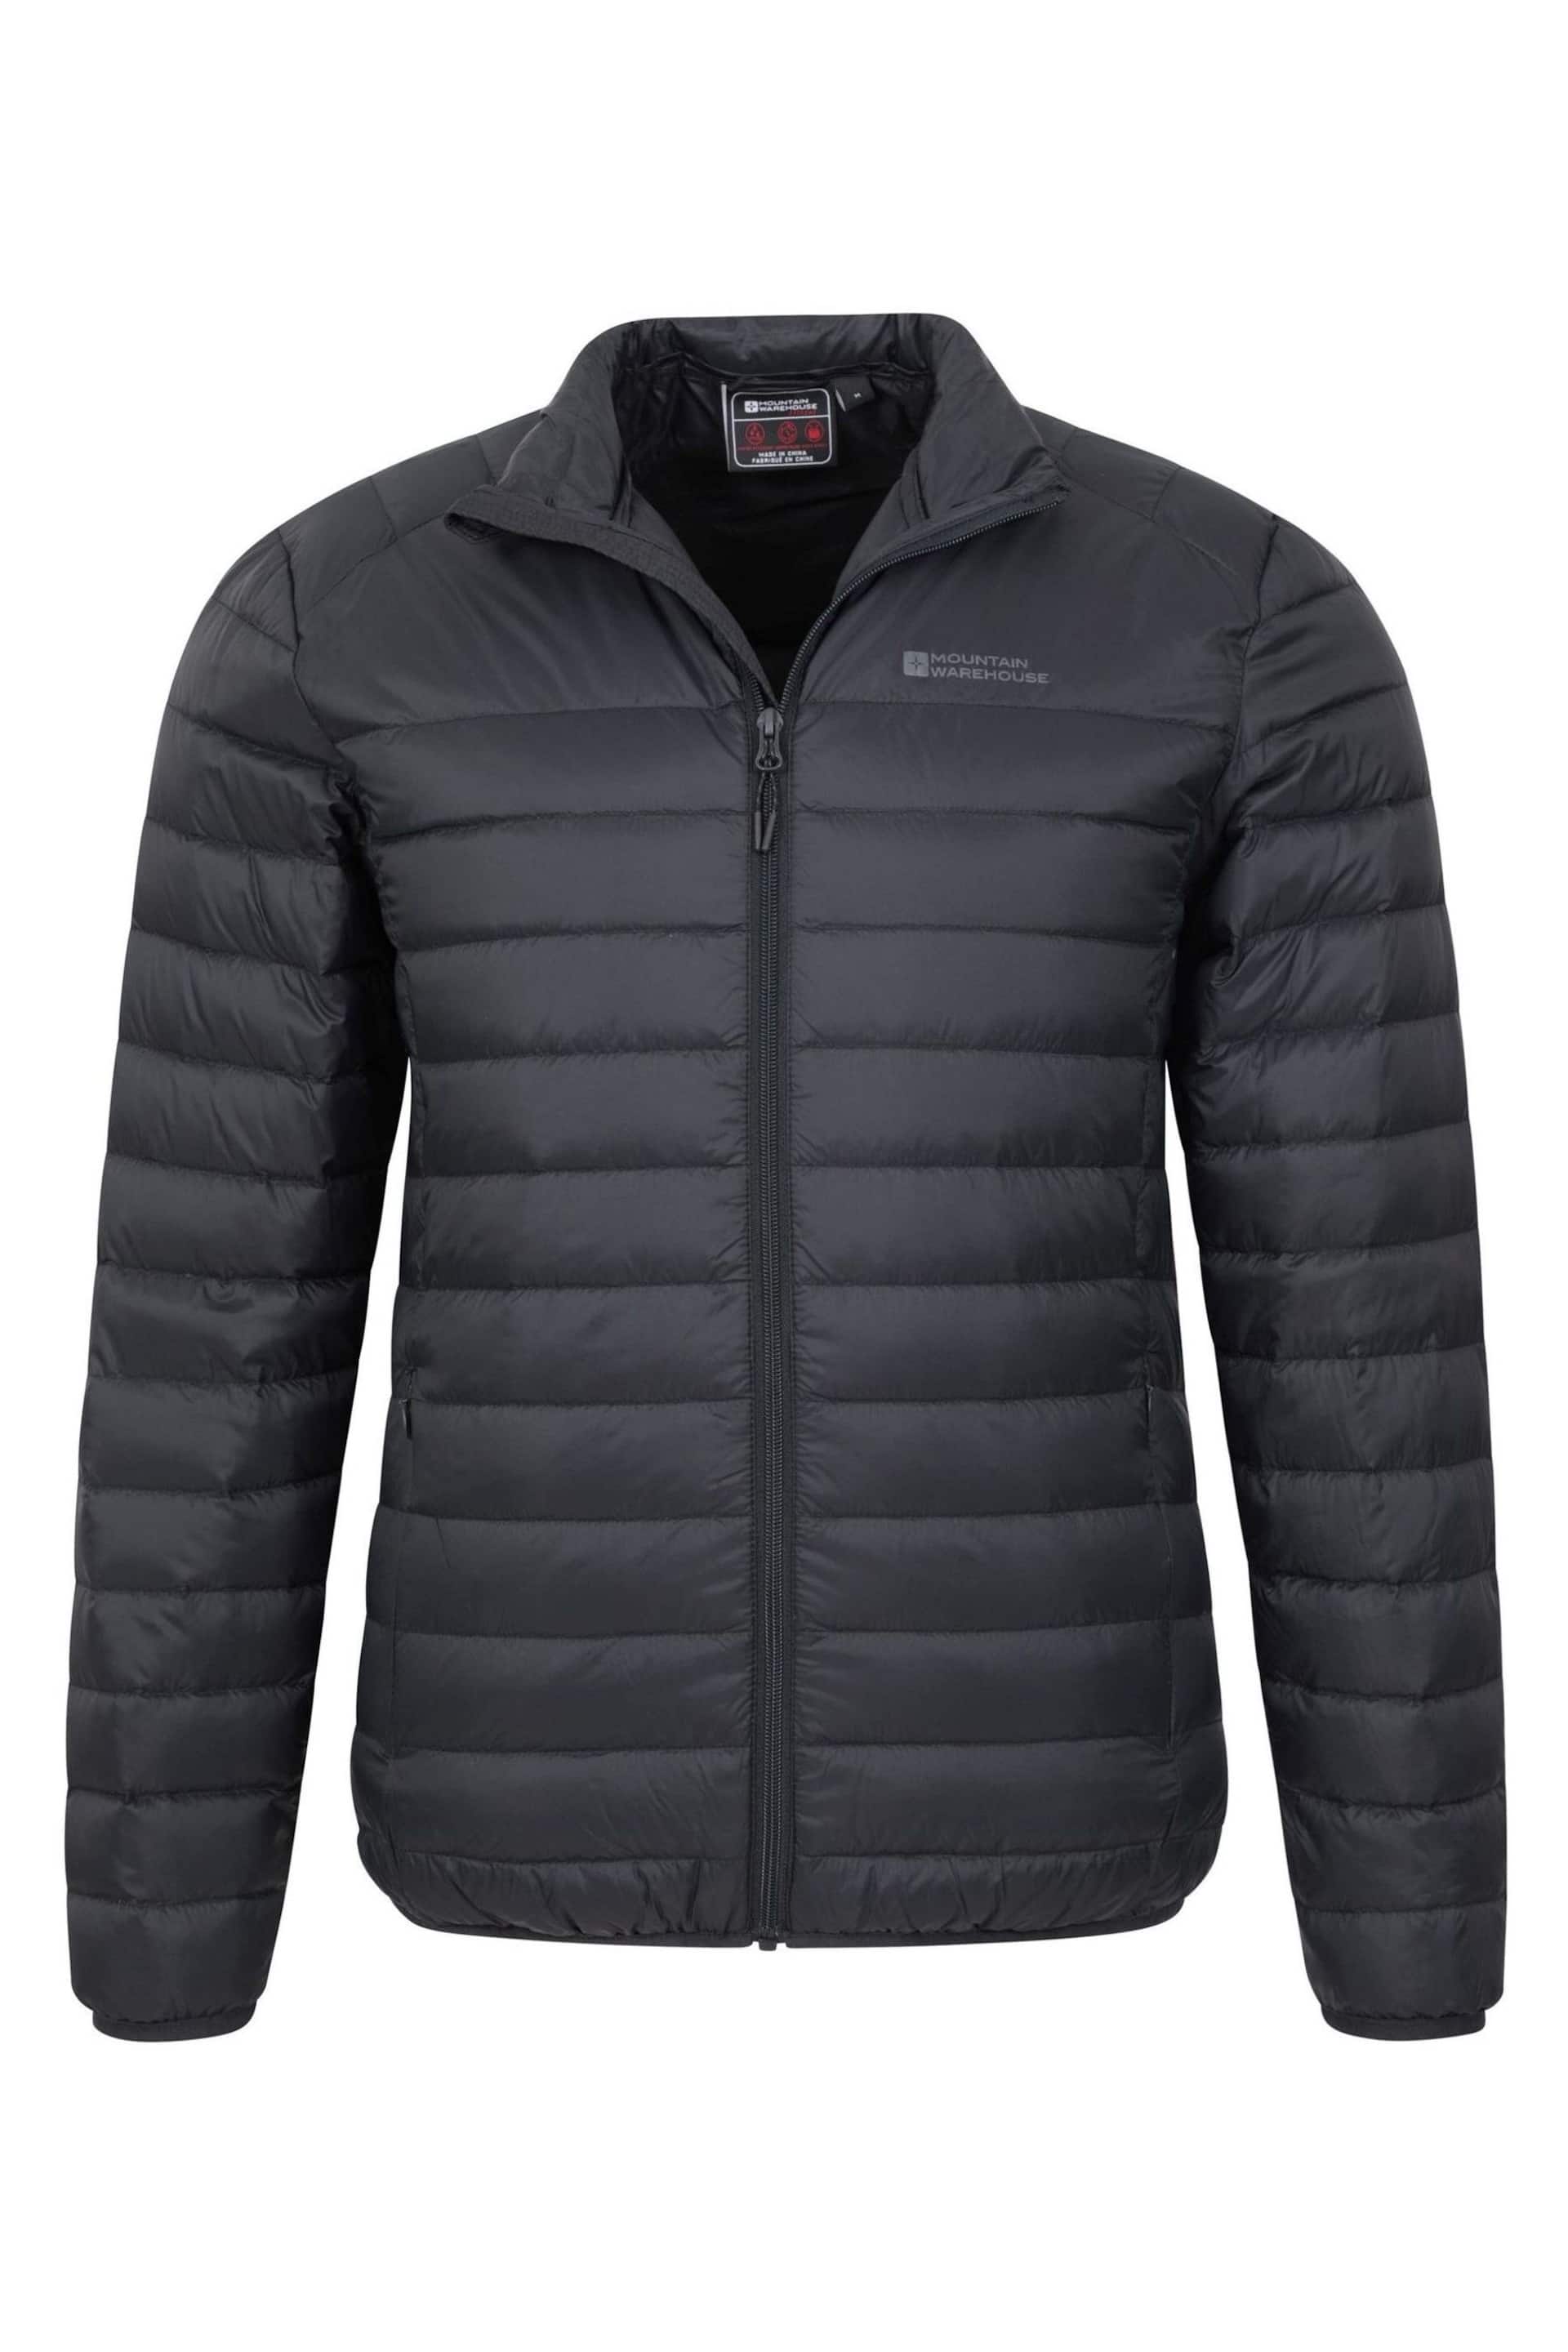 Mountain Warehouse Black Featherweight Down Mens Jacket - Image 5 of 5